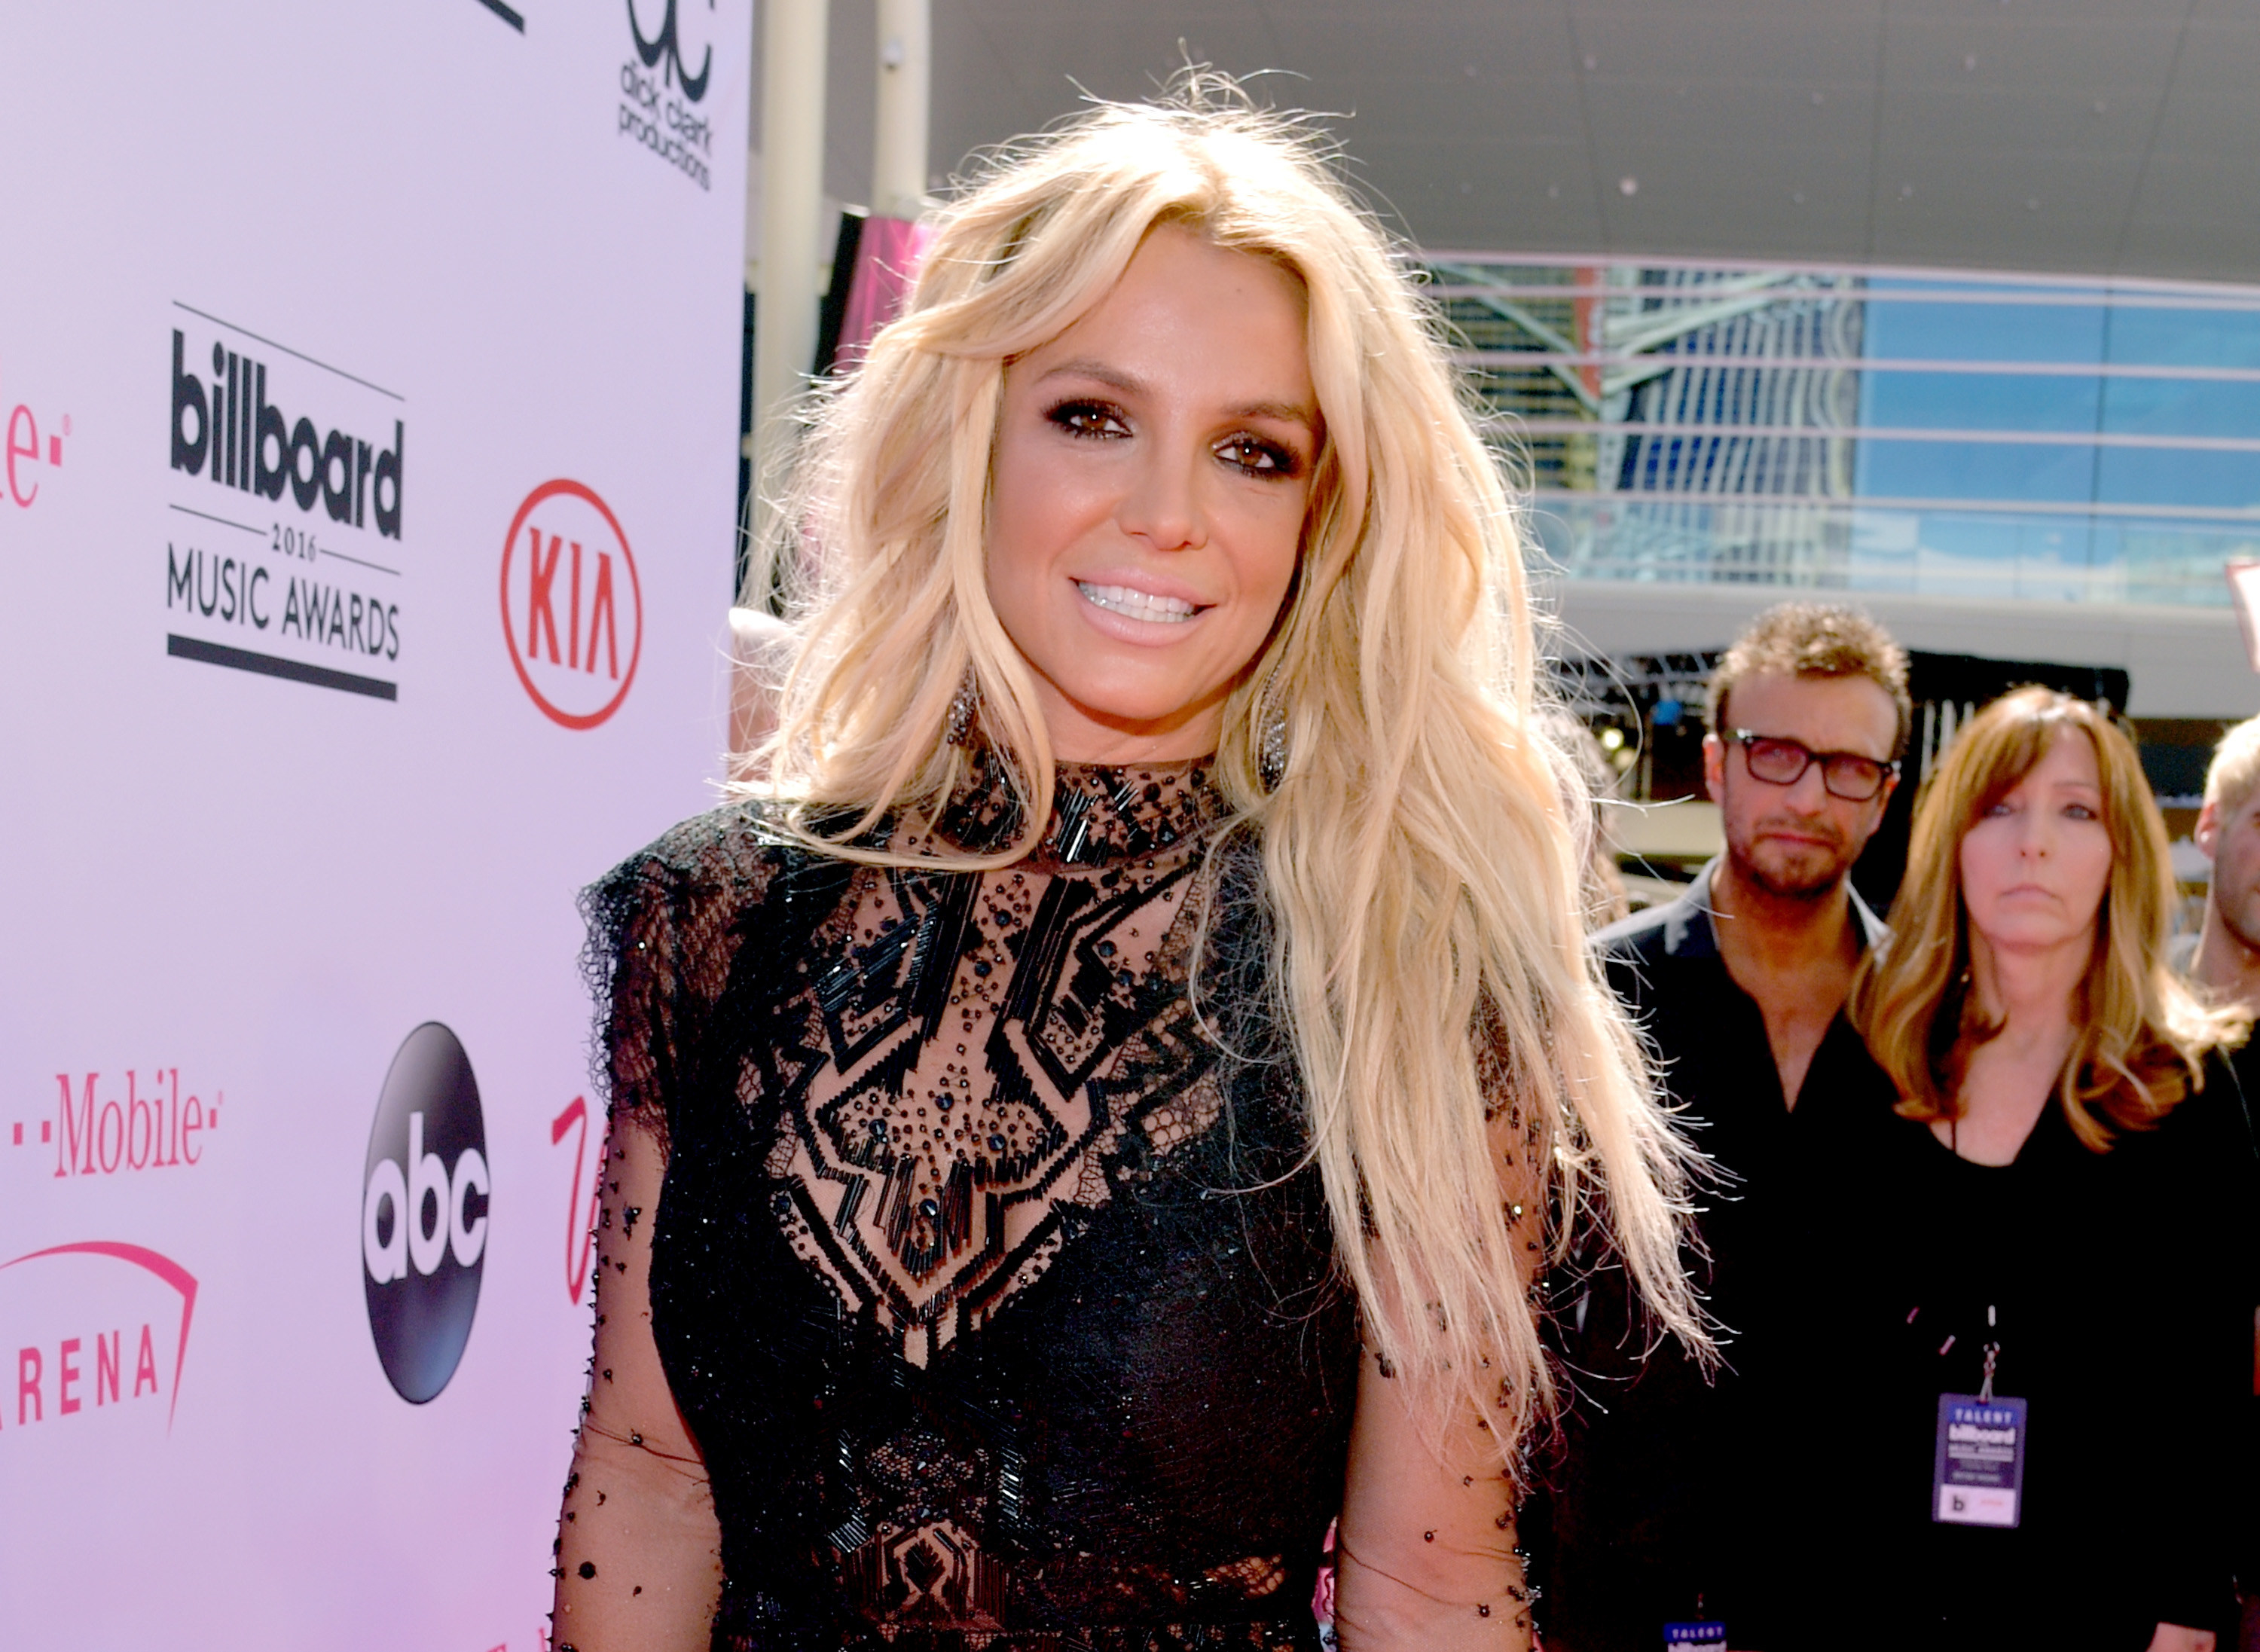 Spears smiles while wearing a cut-out dress at a red carpet event